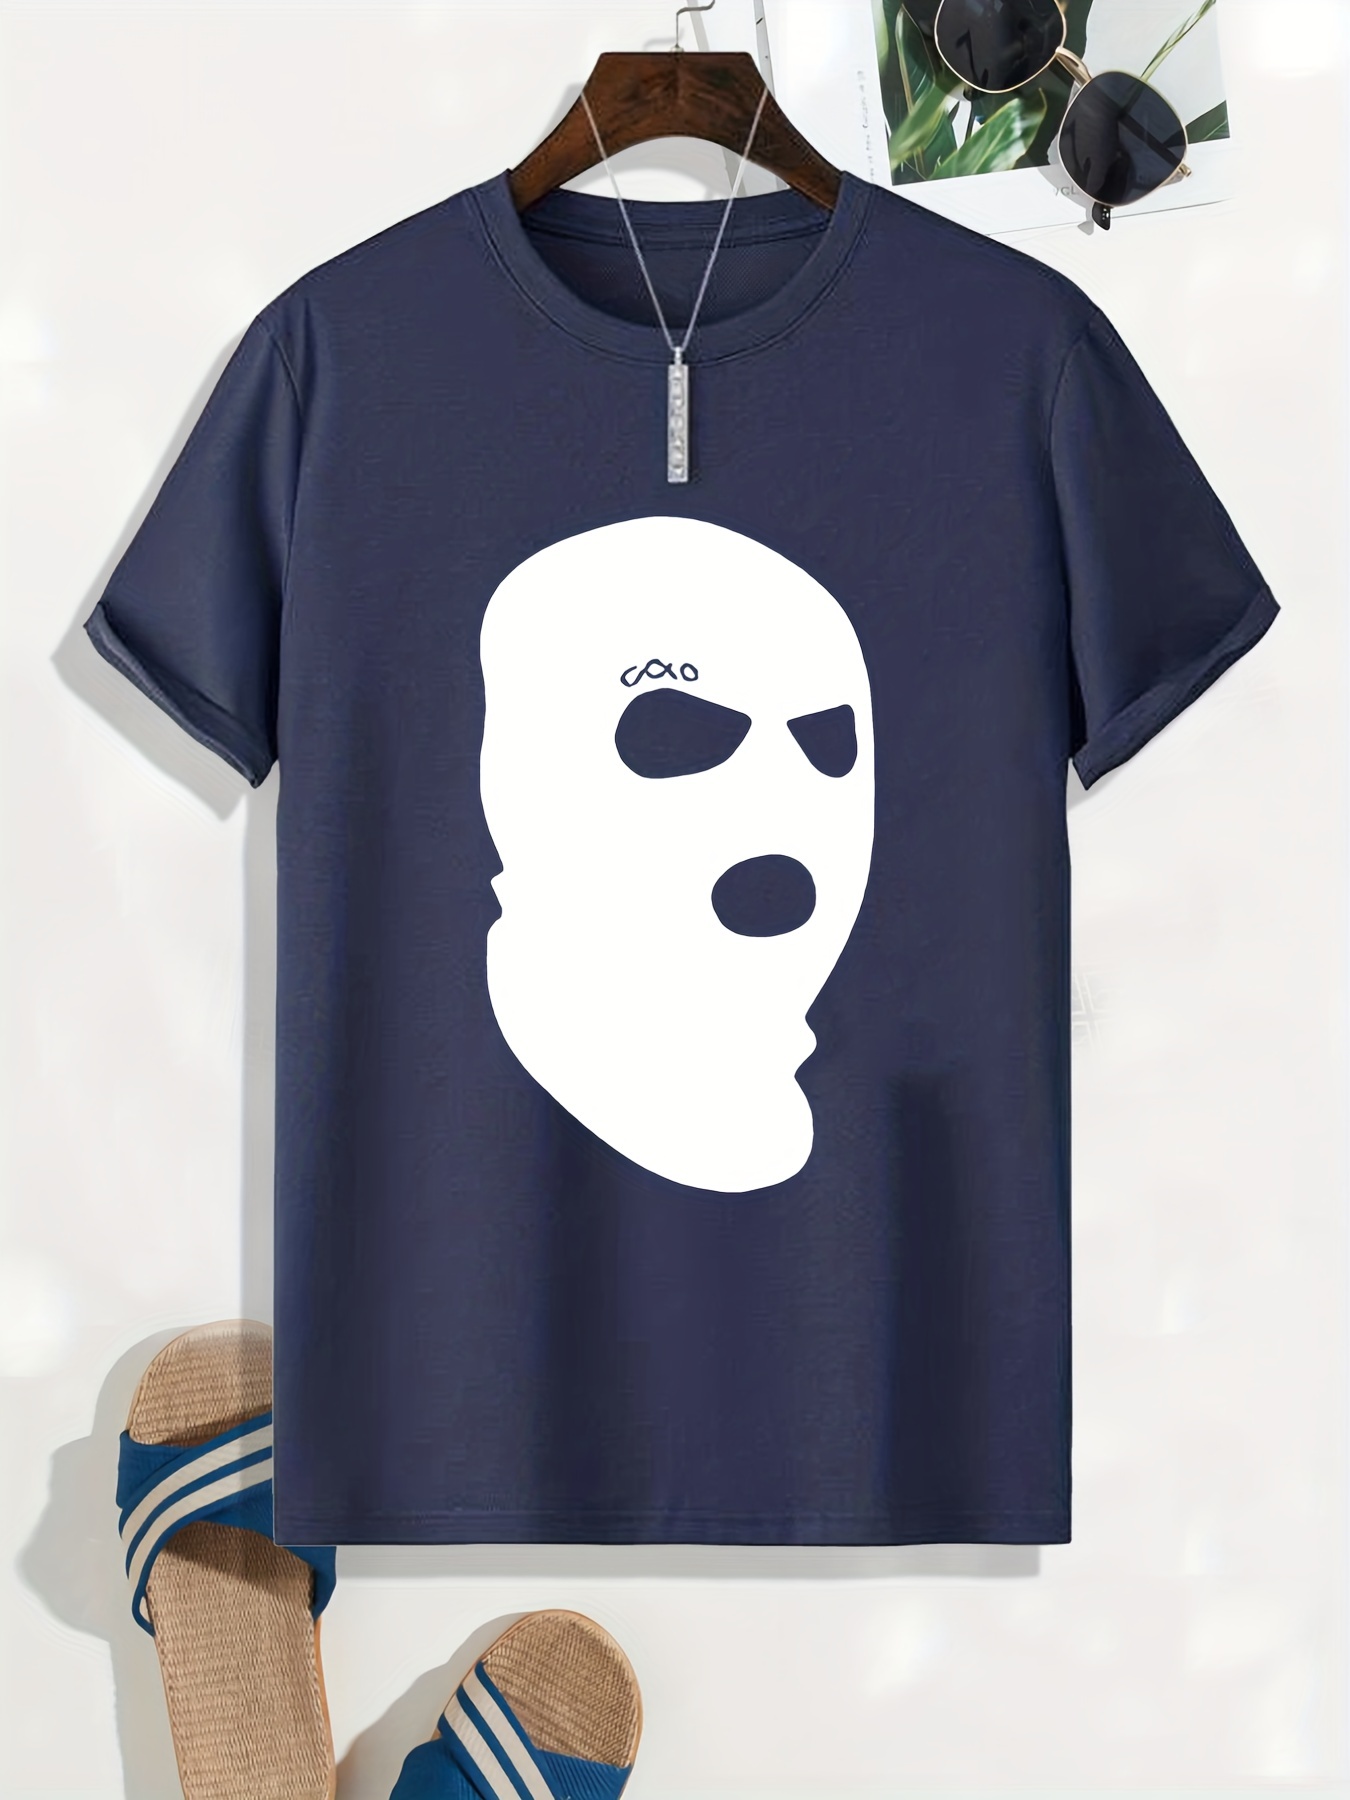 3 Hole Ski Mask Print T Shirt Tees For Men Casual Short Sleeve Tshirt For  Summer Spring Fall Tops As Gifts, 24/7 Customer Service